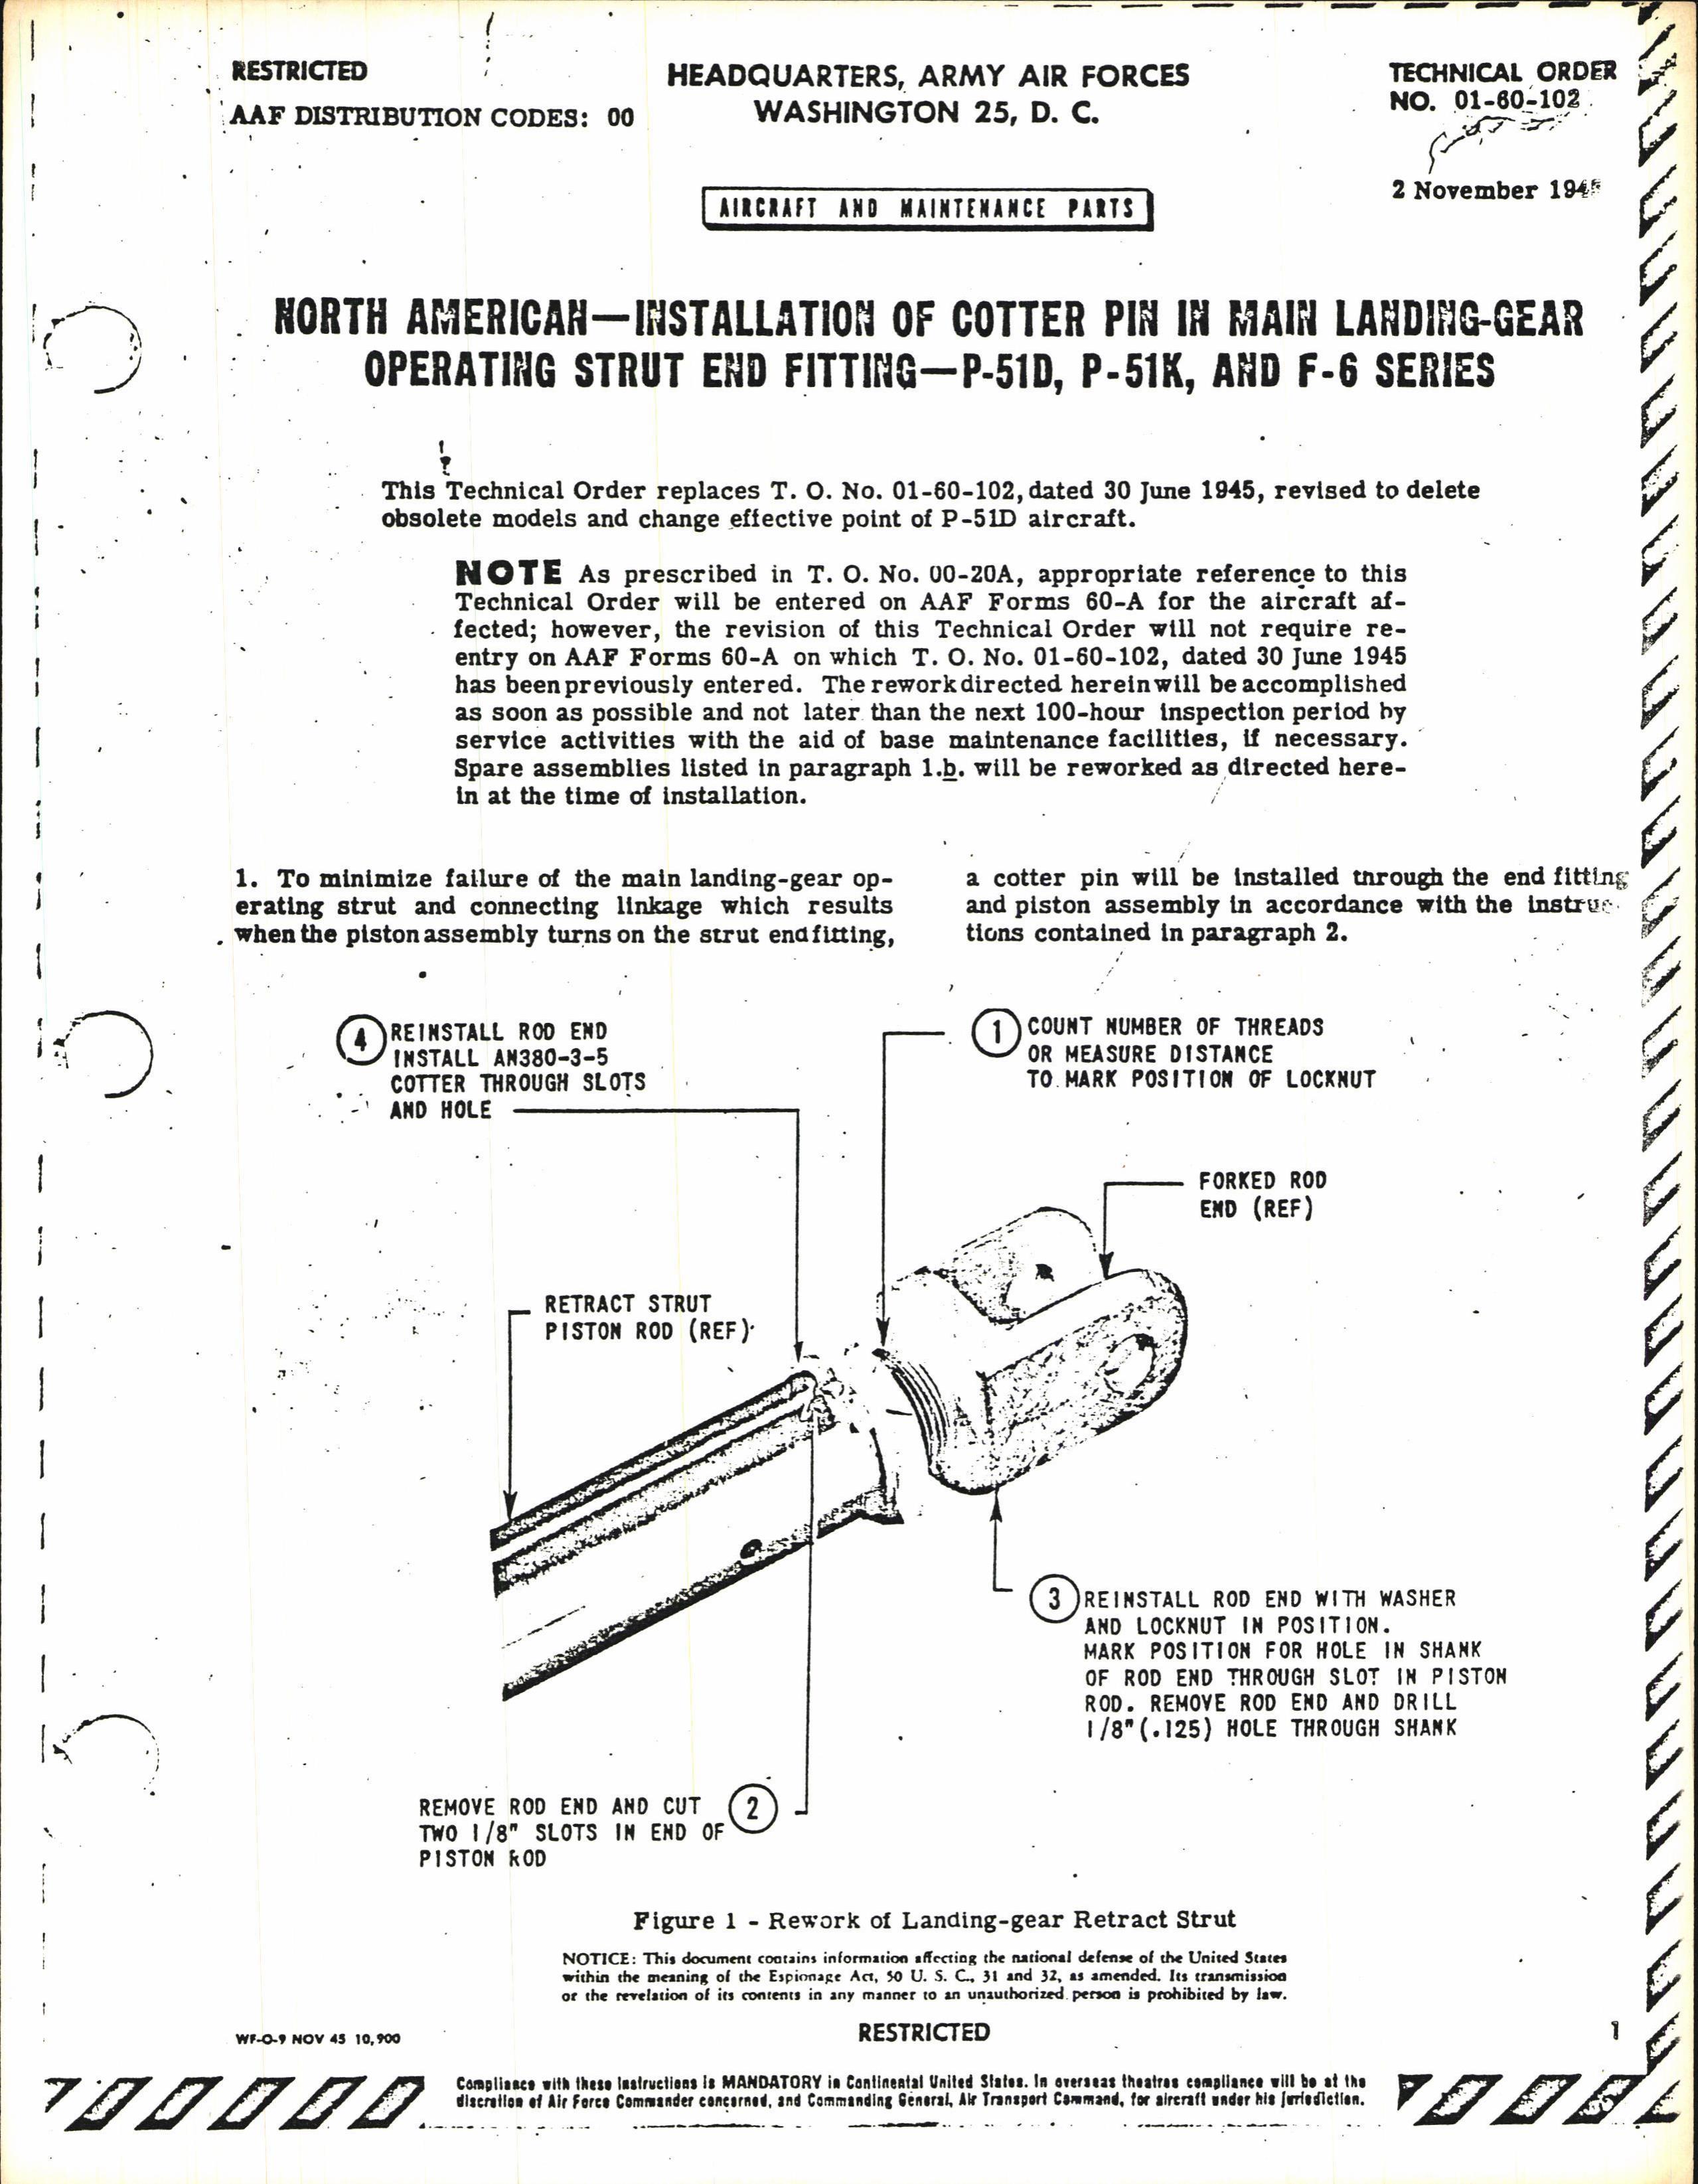 Sample page 1 from AirCorps Library document: Installation of Cotter Pin in Main Landing-Gear Operating Strut End Fitting